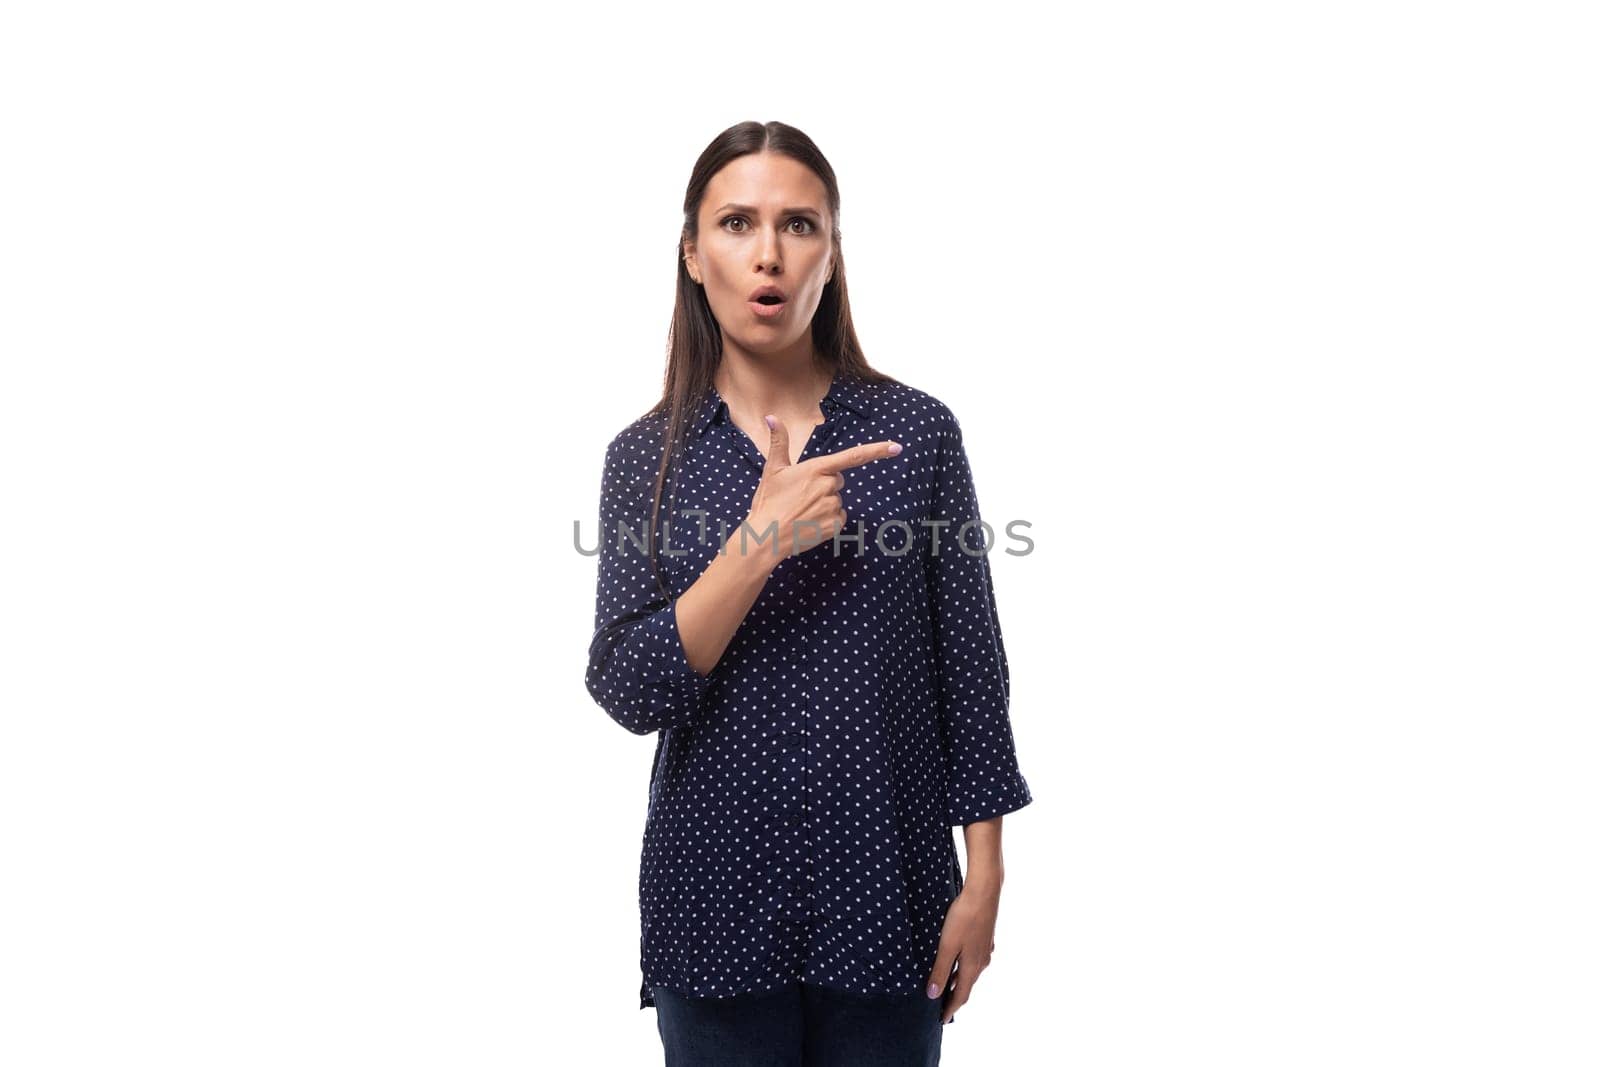 young adorable slim brunette woman dressed in blue polka dot shirt.